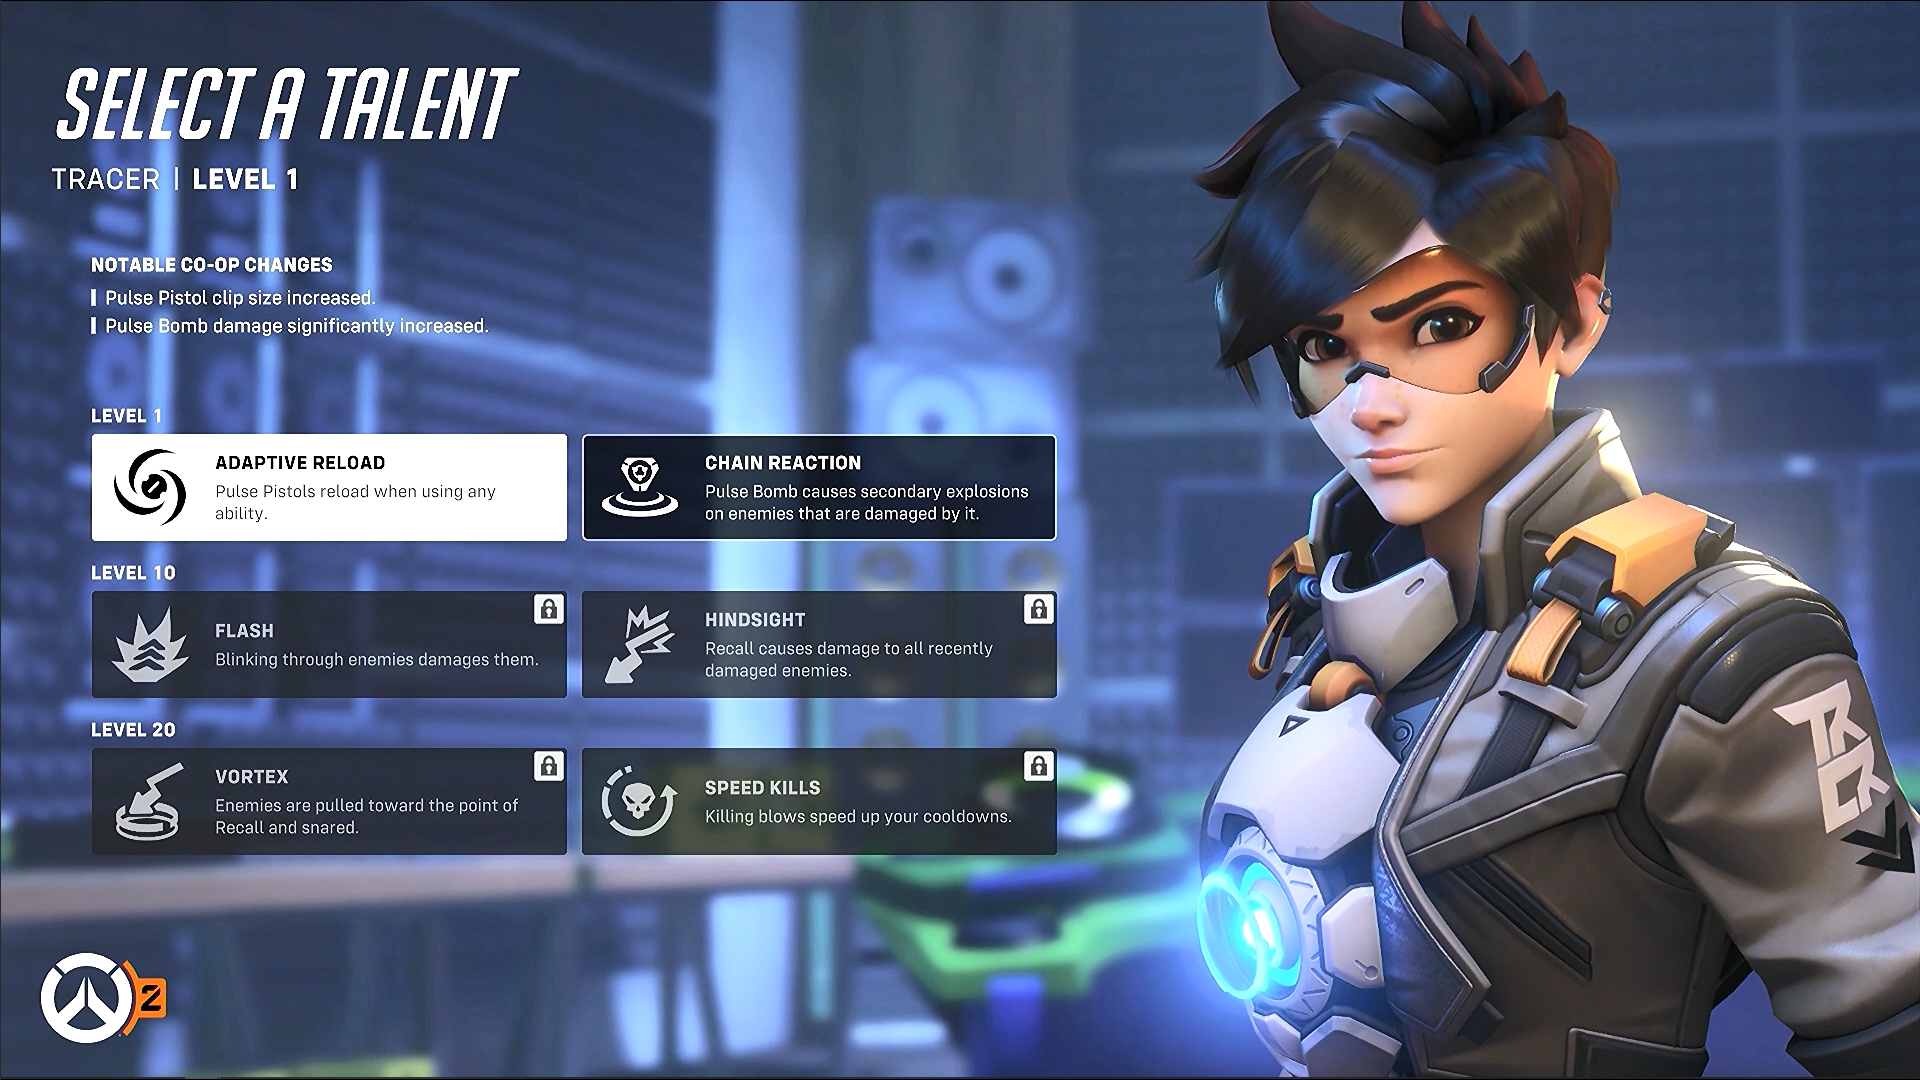 Overwatch: 10 Things About Tracer You Didn't Know